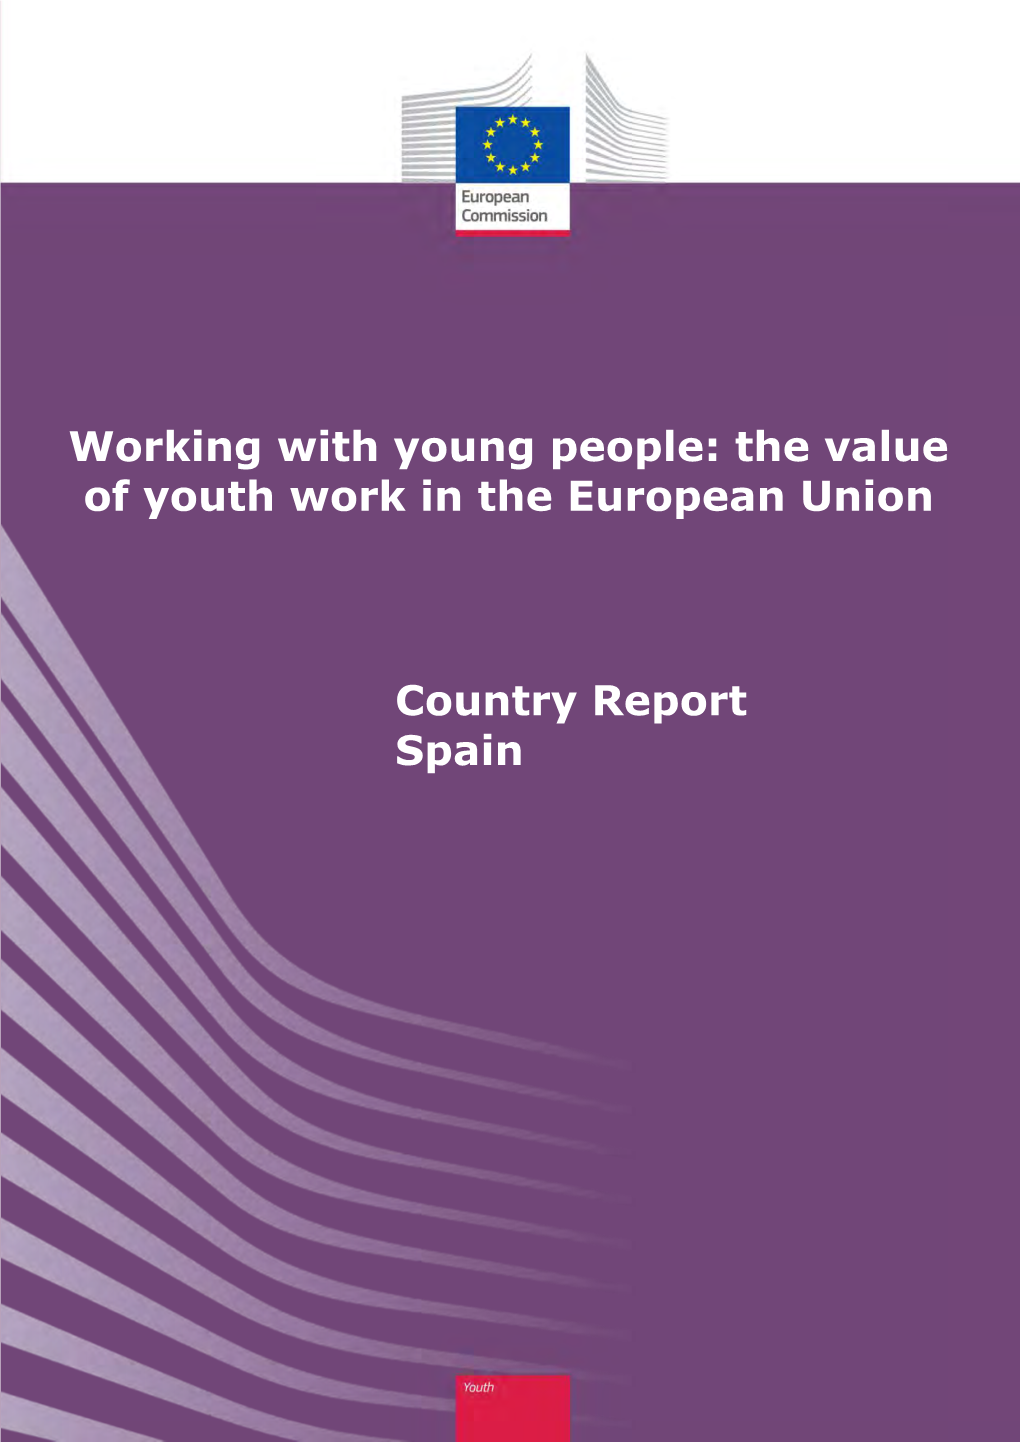 The Value of Youth Work in the European Union Country Report